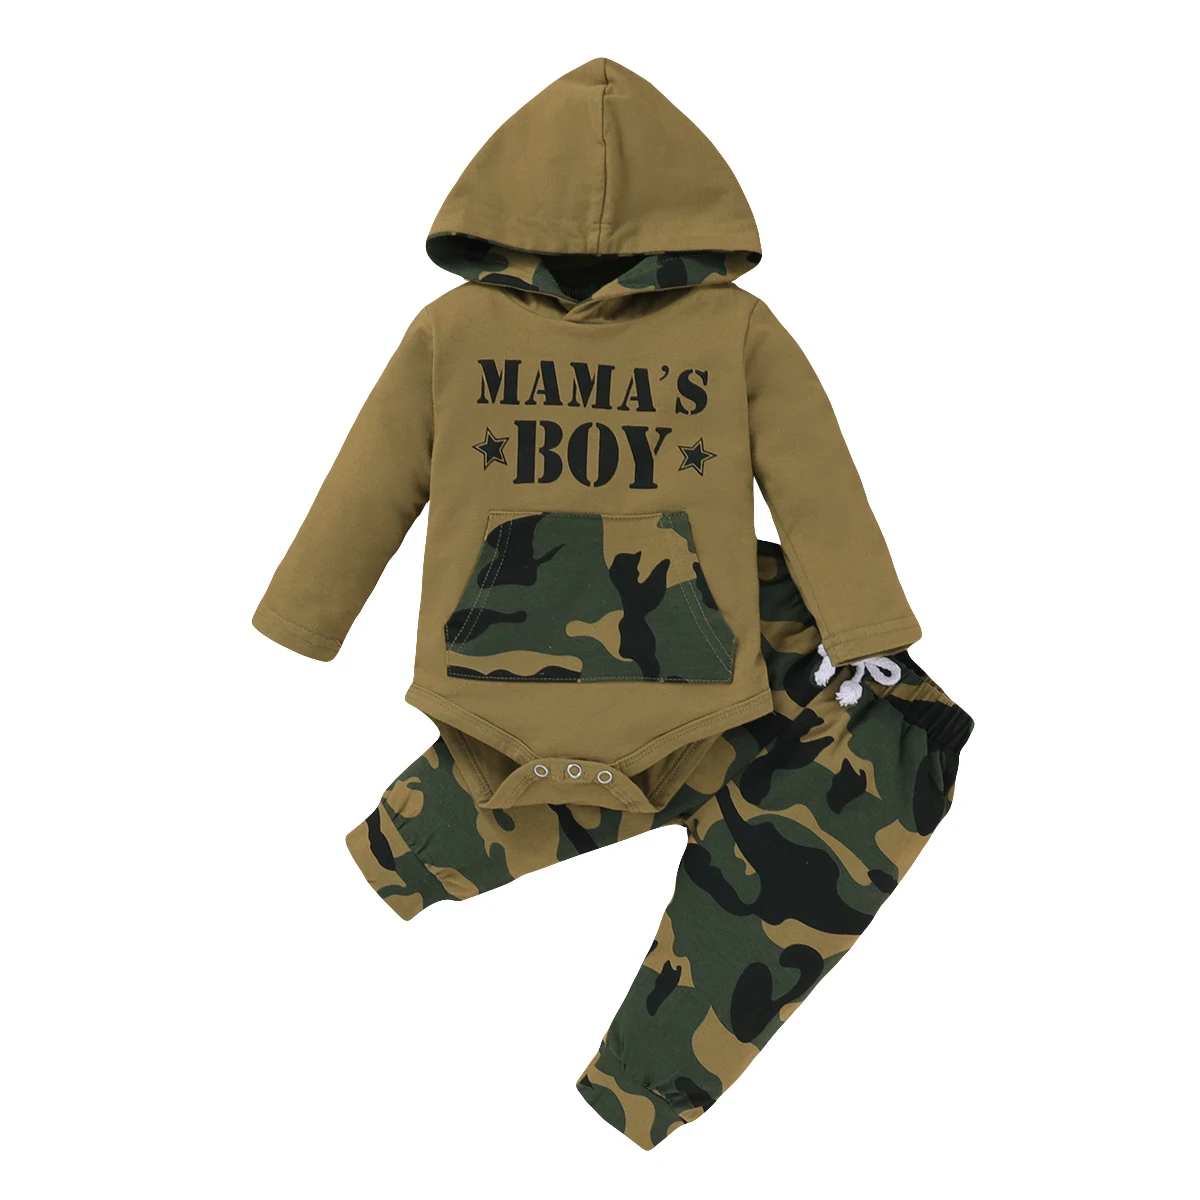 

3Pcs Baby Boys Little Brother Camouflage Romper Tops+Pants Leggings Outfits Set baby clothes in bulk boy's clothing sets, Mix,as sample